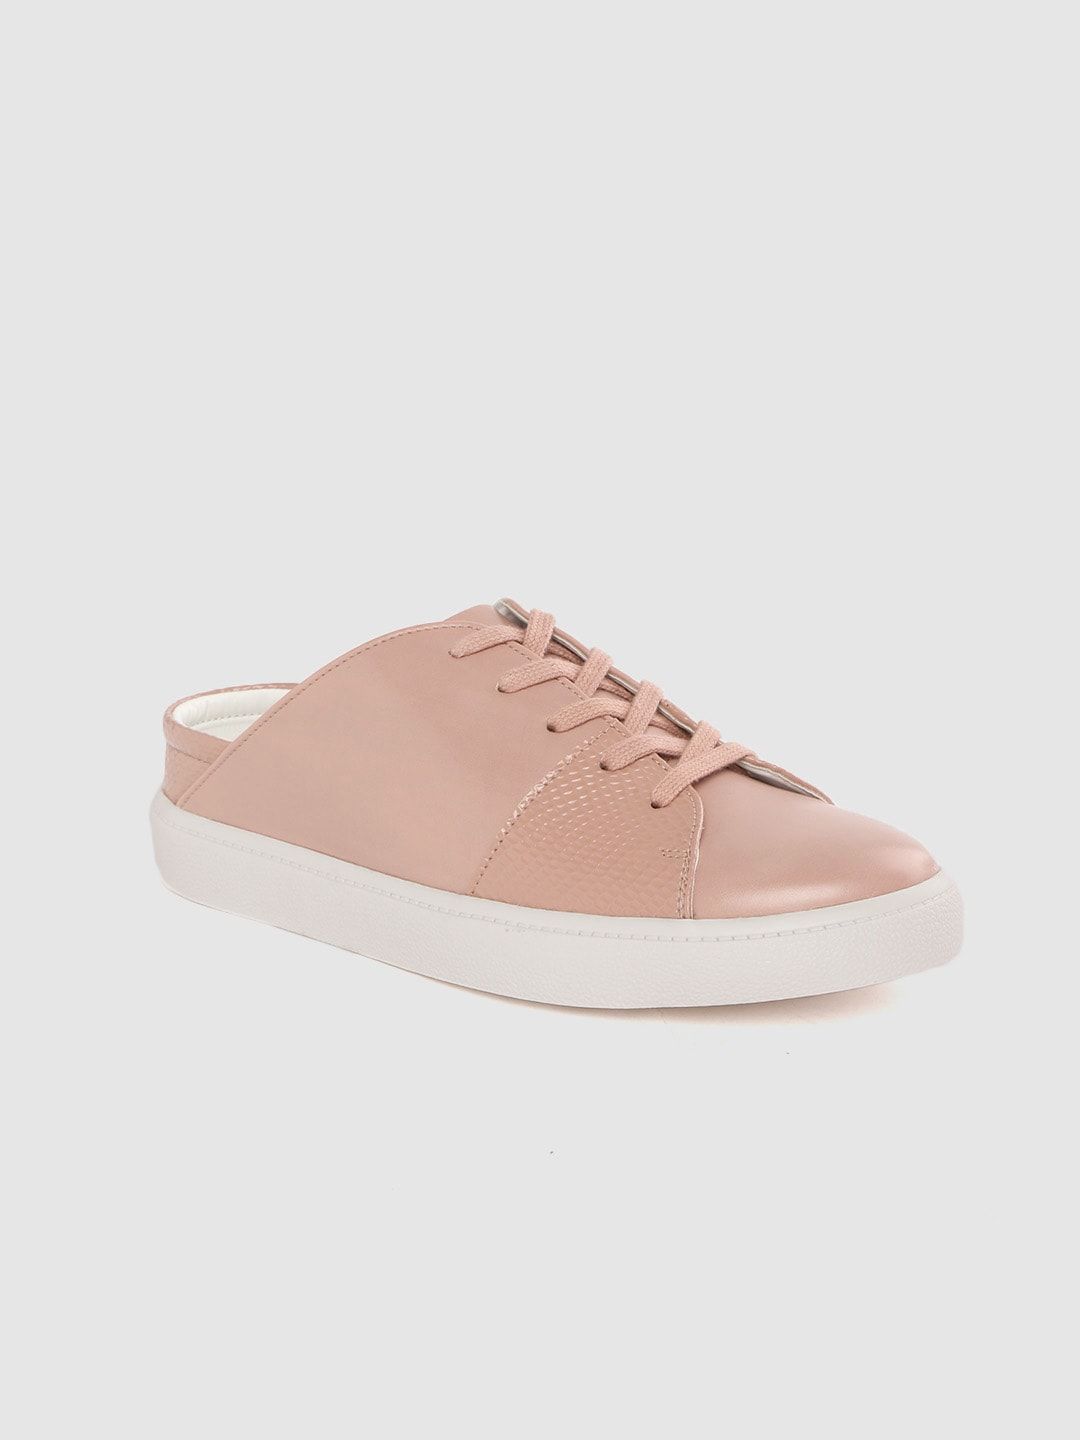 DressBerry Women Peach-Coloured Slip-On Sneakers with Lace-up Detail Price in India